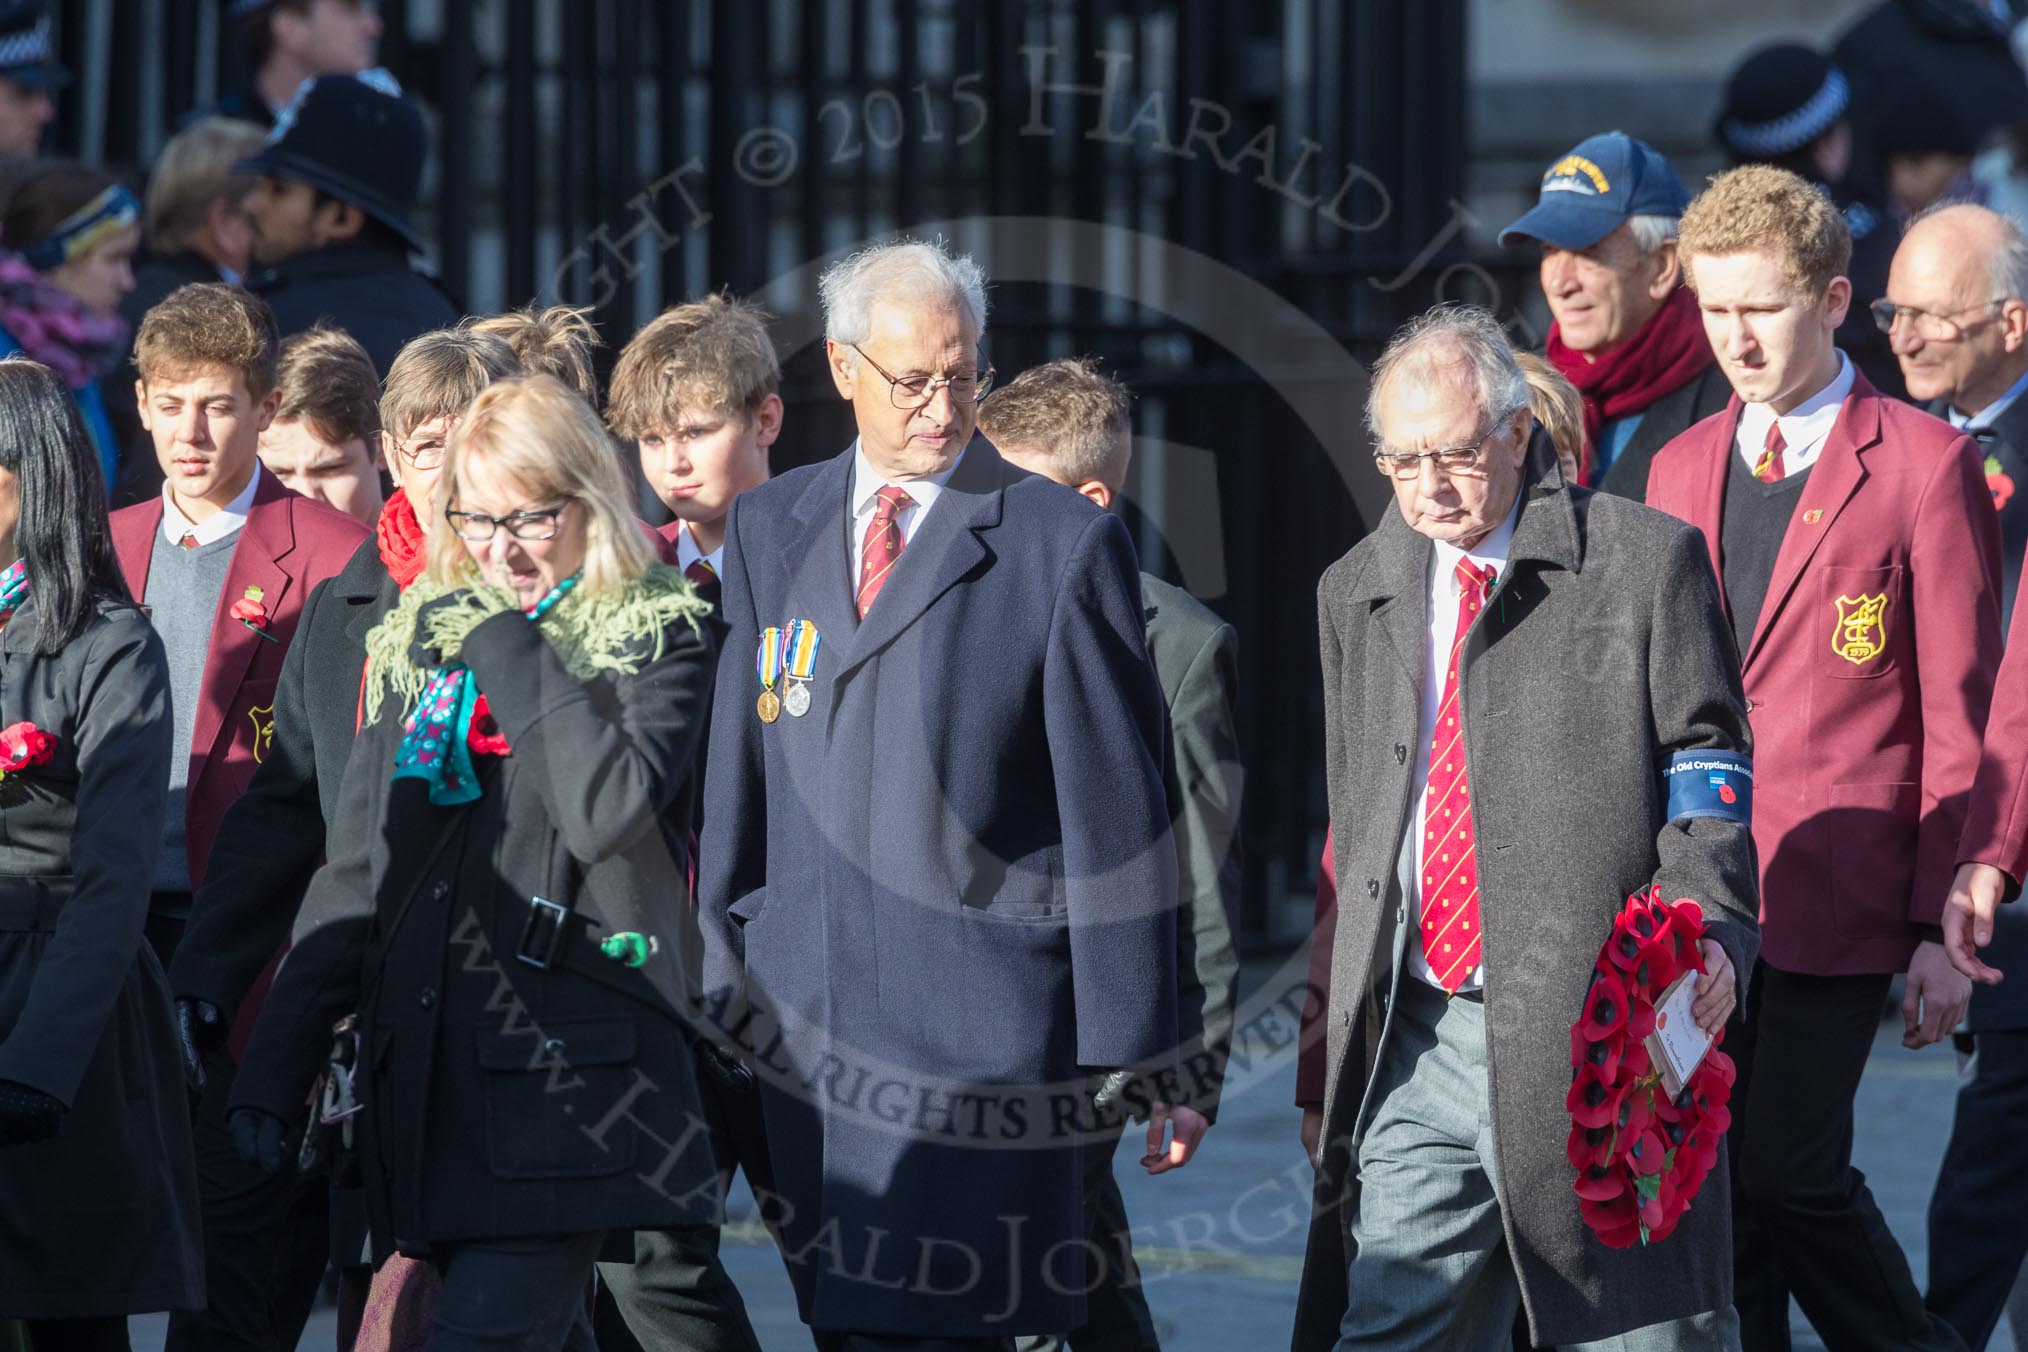 March Past, Remembrance Sunday at the Cenotaph 2016: M20 Old Cryptians' Club.
Cenotaph, Whitehall, London SW1,
London,
Greater London,
United Kingdom,
on 13 November 2016 at 13:16, image #2651